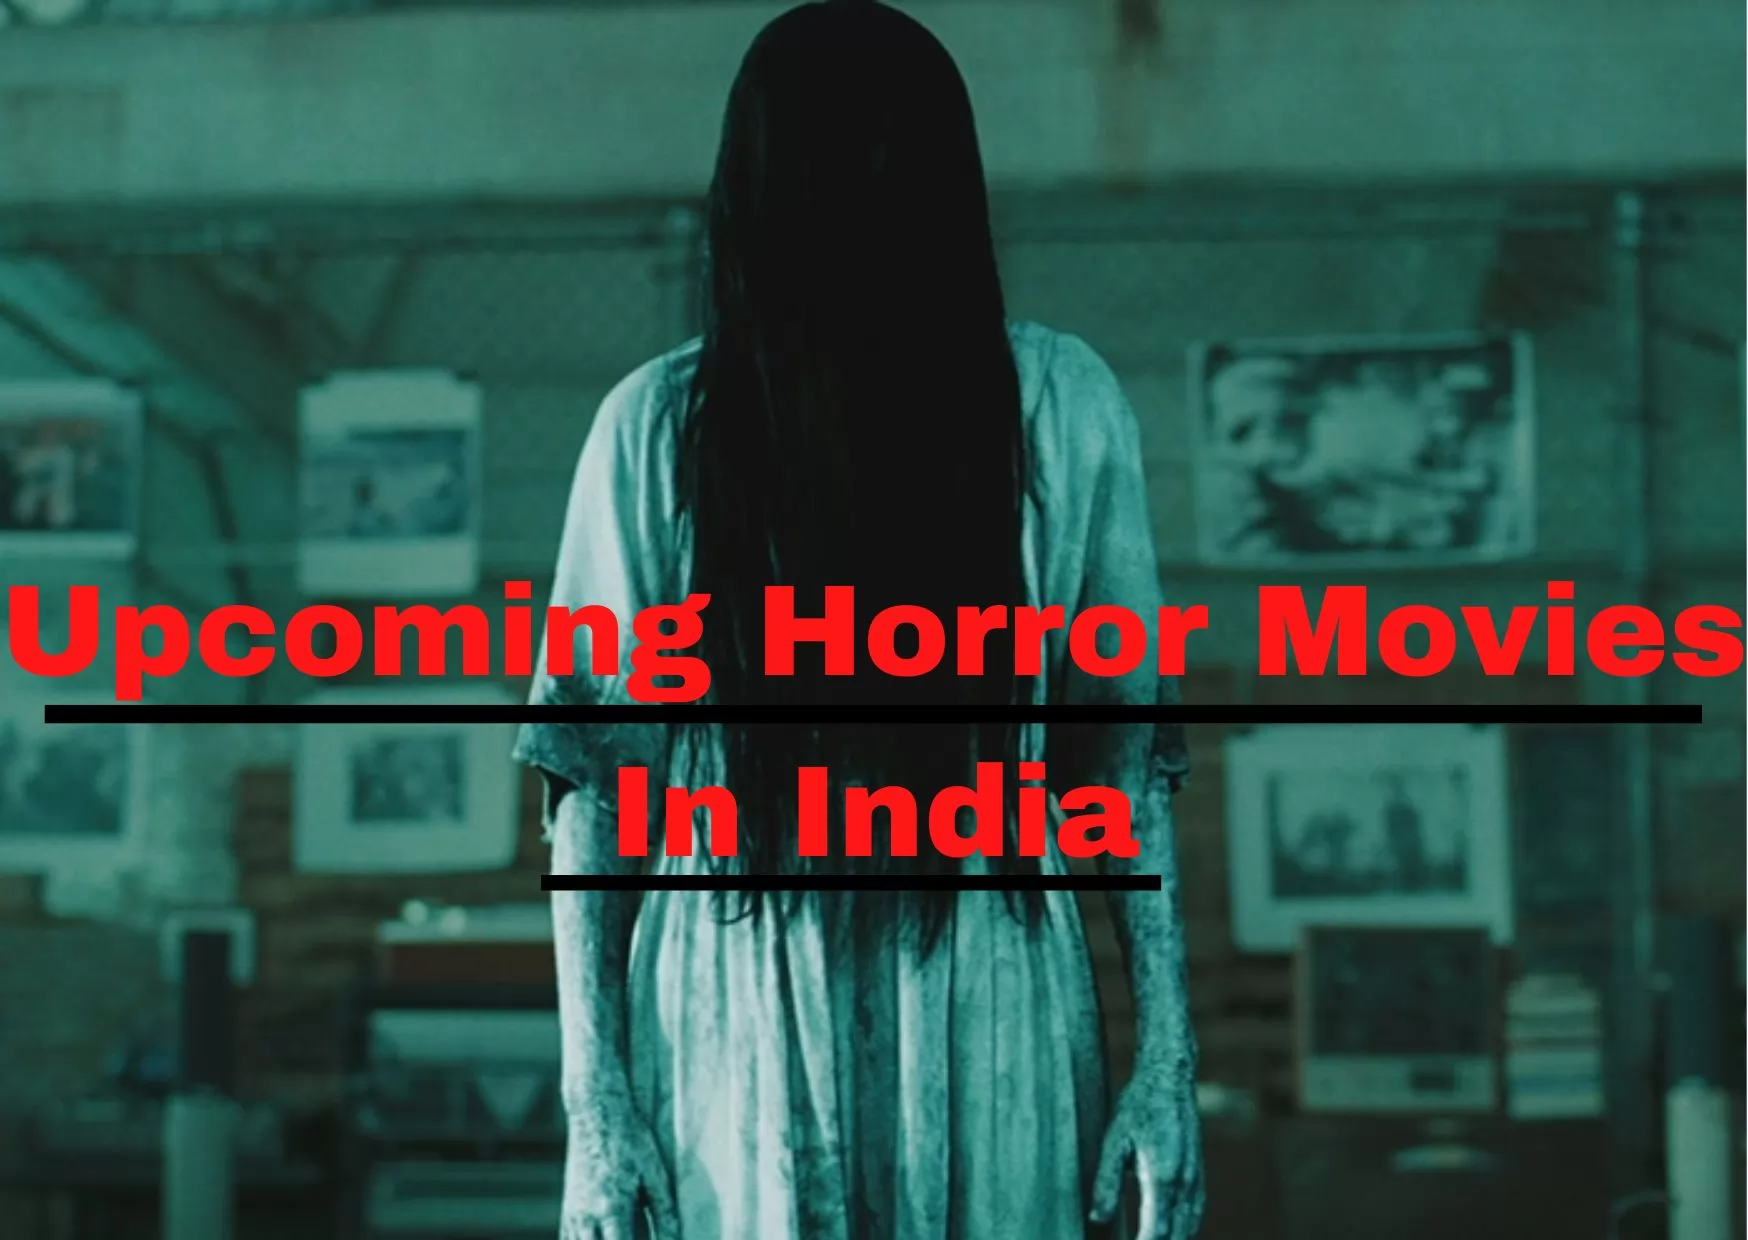 7 Upcoming Horror Movies in India